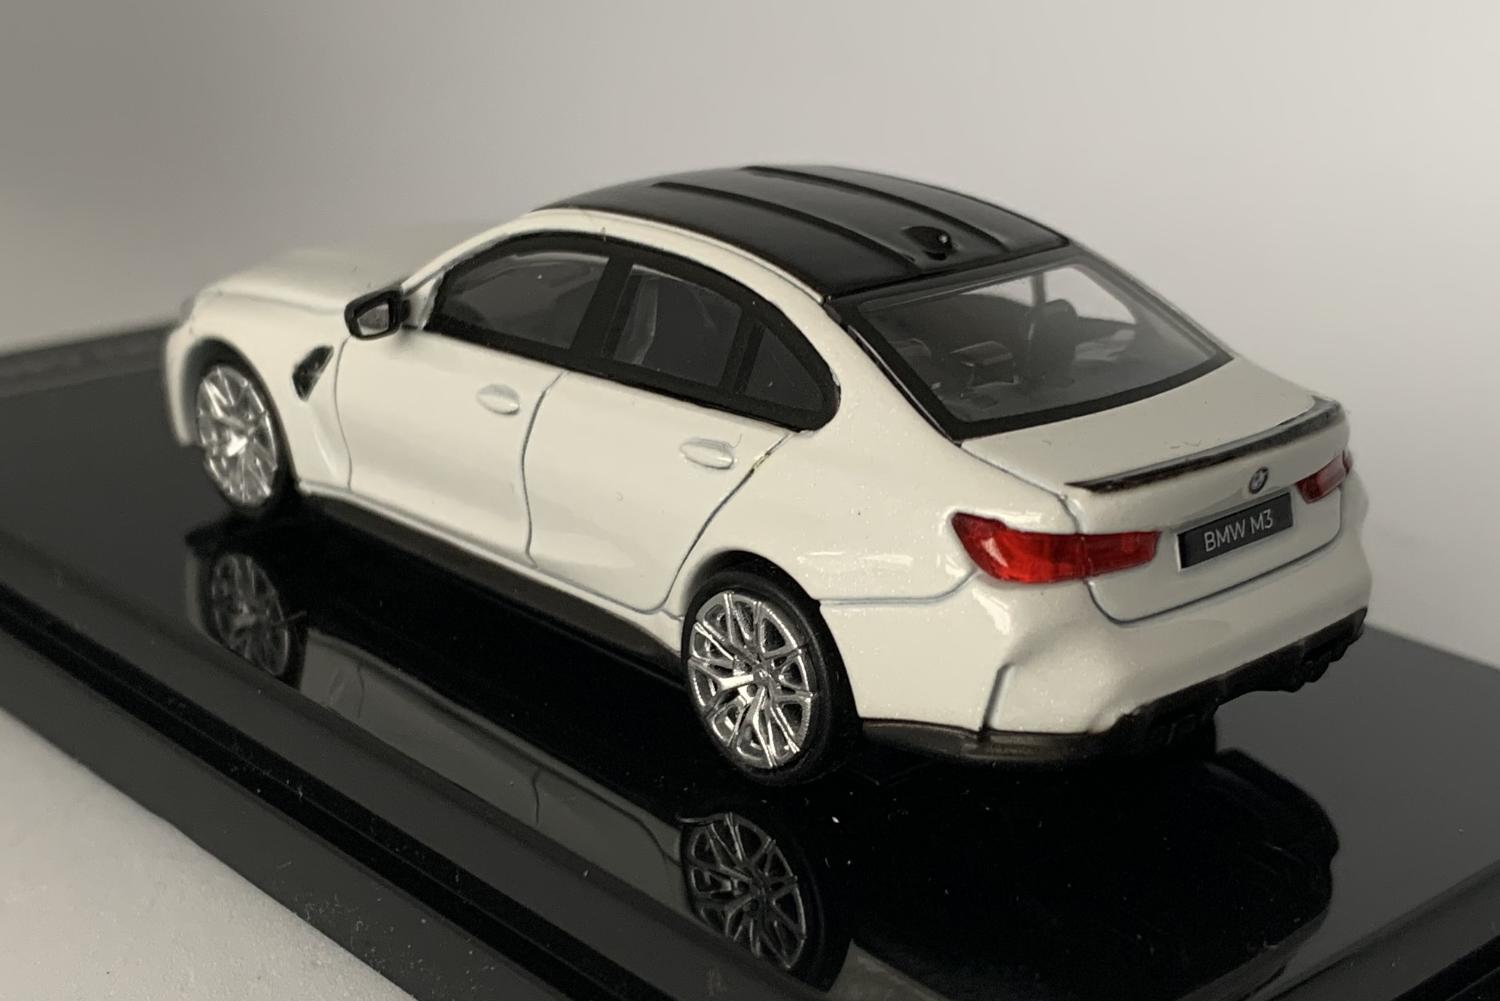 BMW M3 G80 in frozen brilliant white 1:64 scale model from Paragon Models